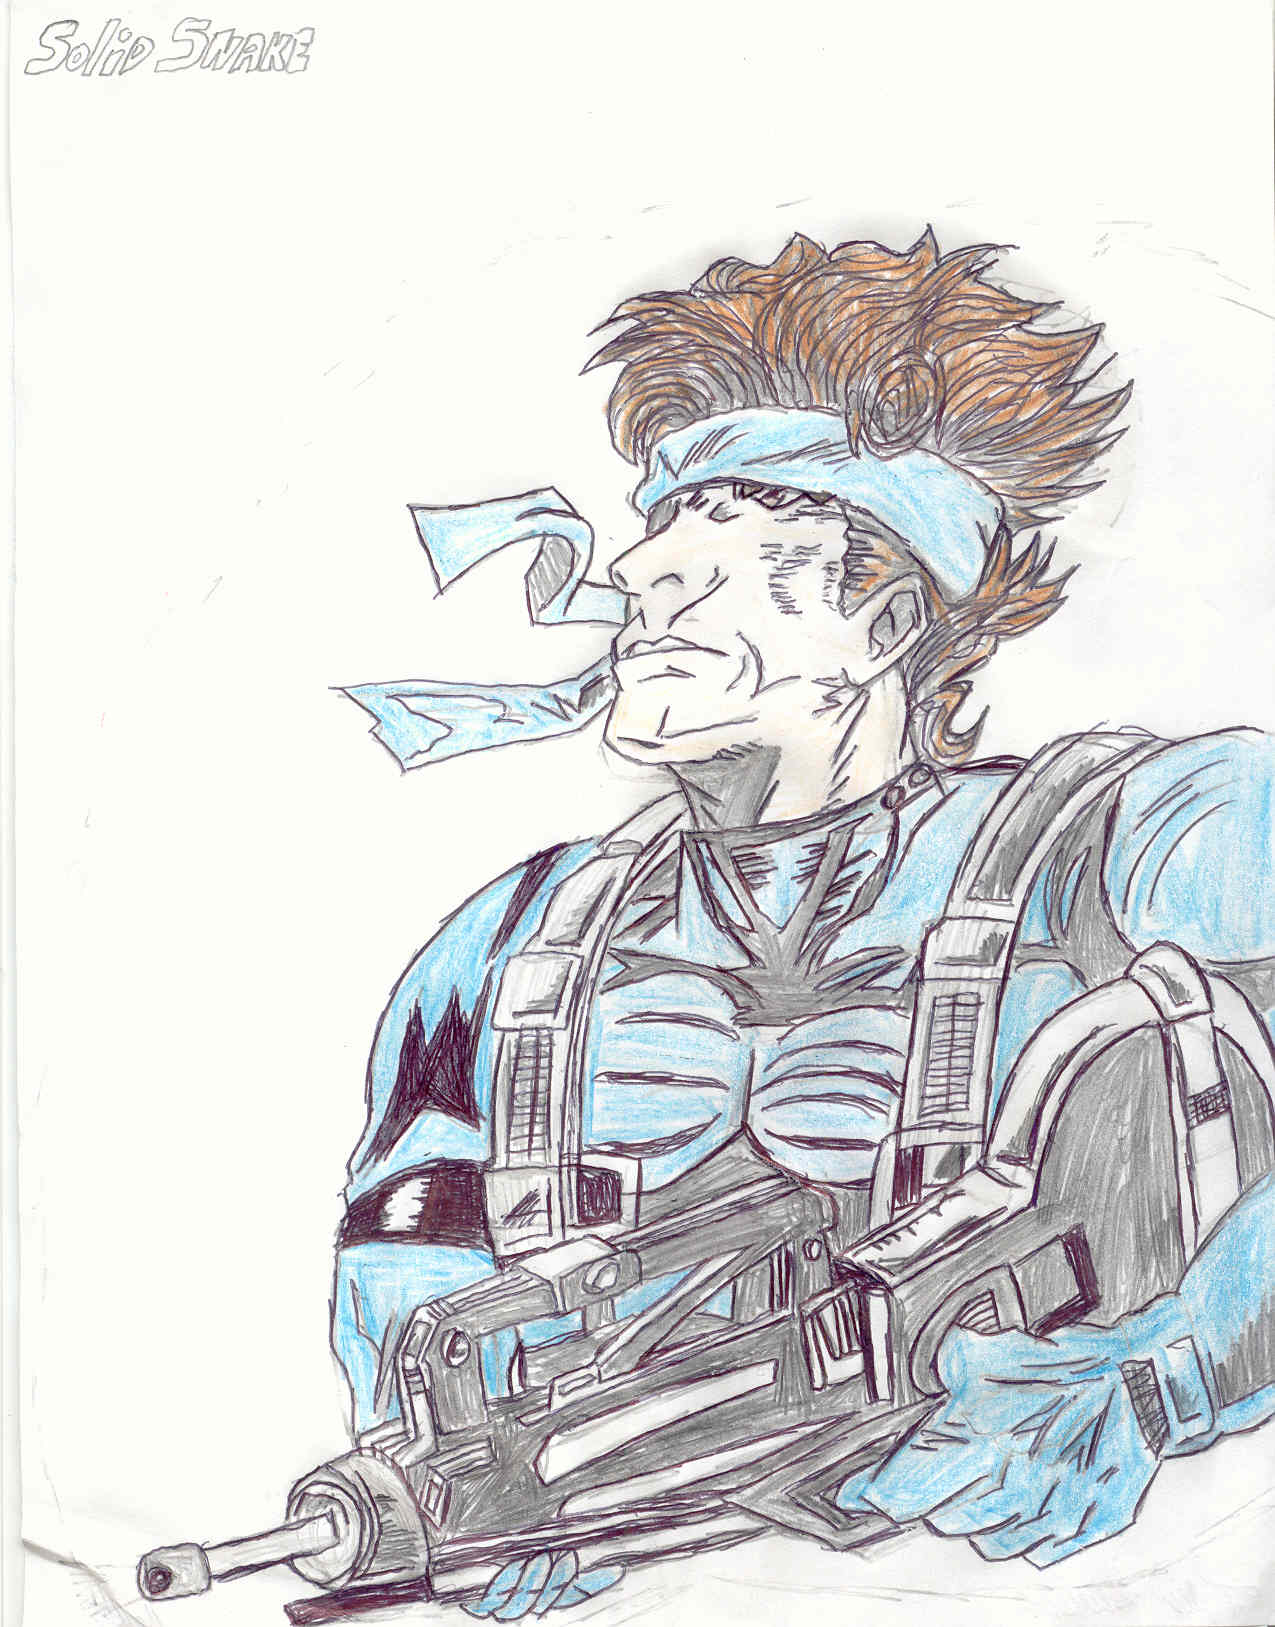 Solid Snake by MageKnight007